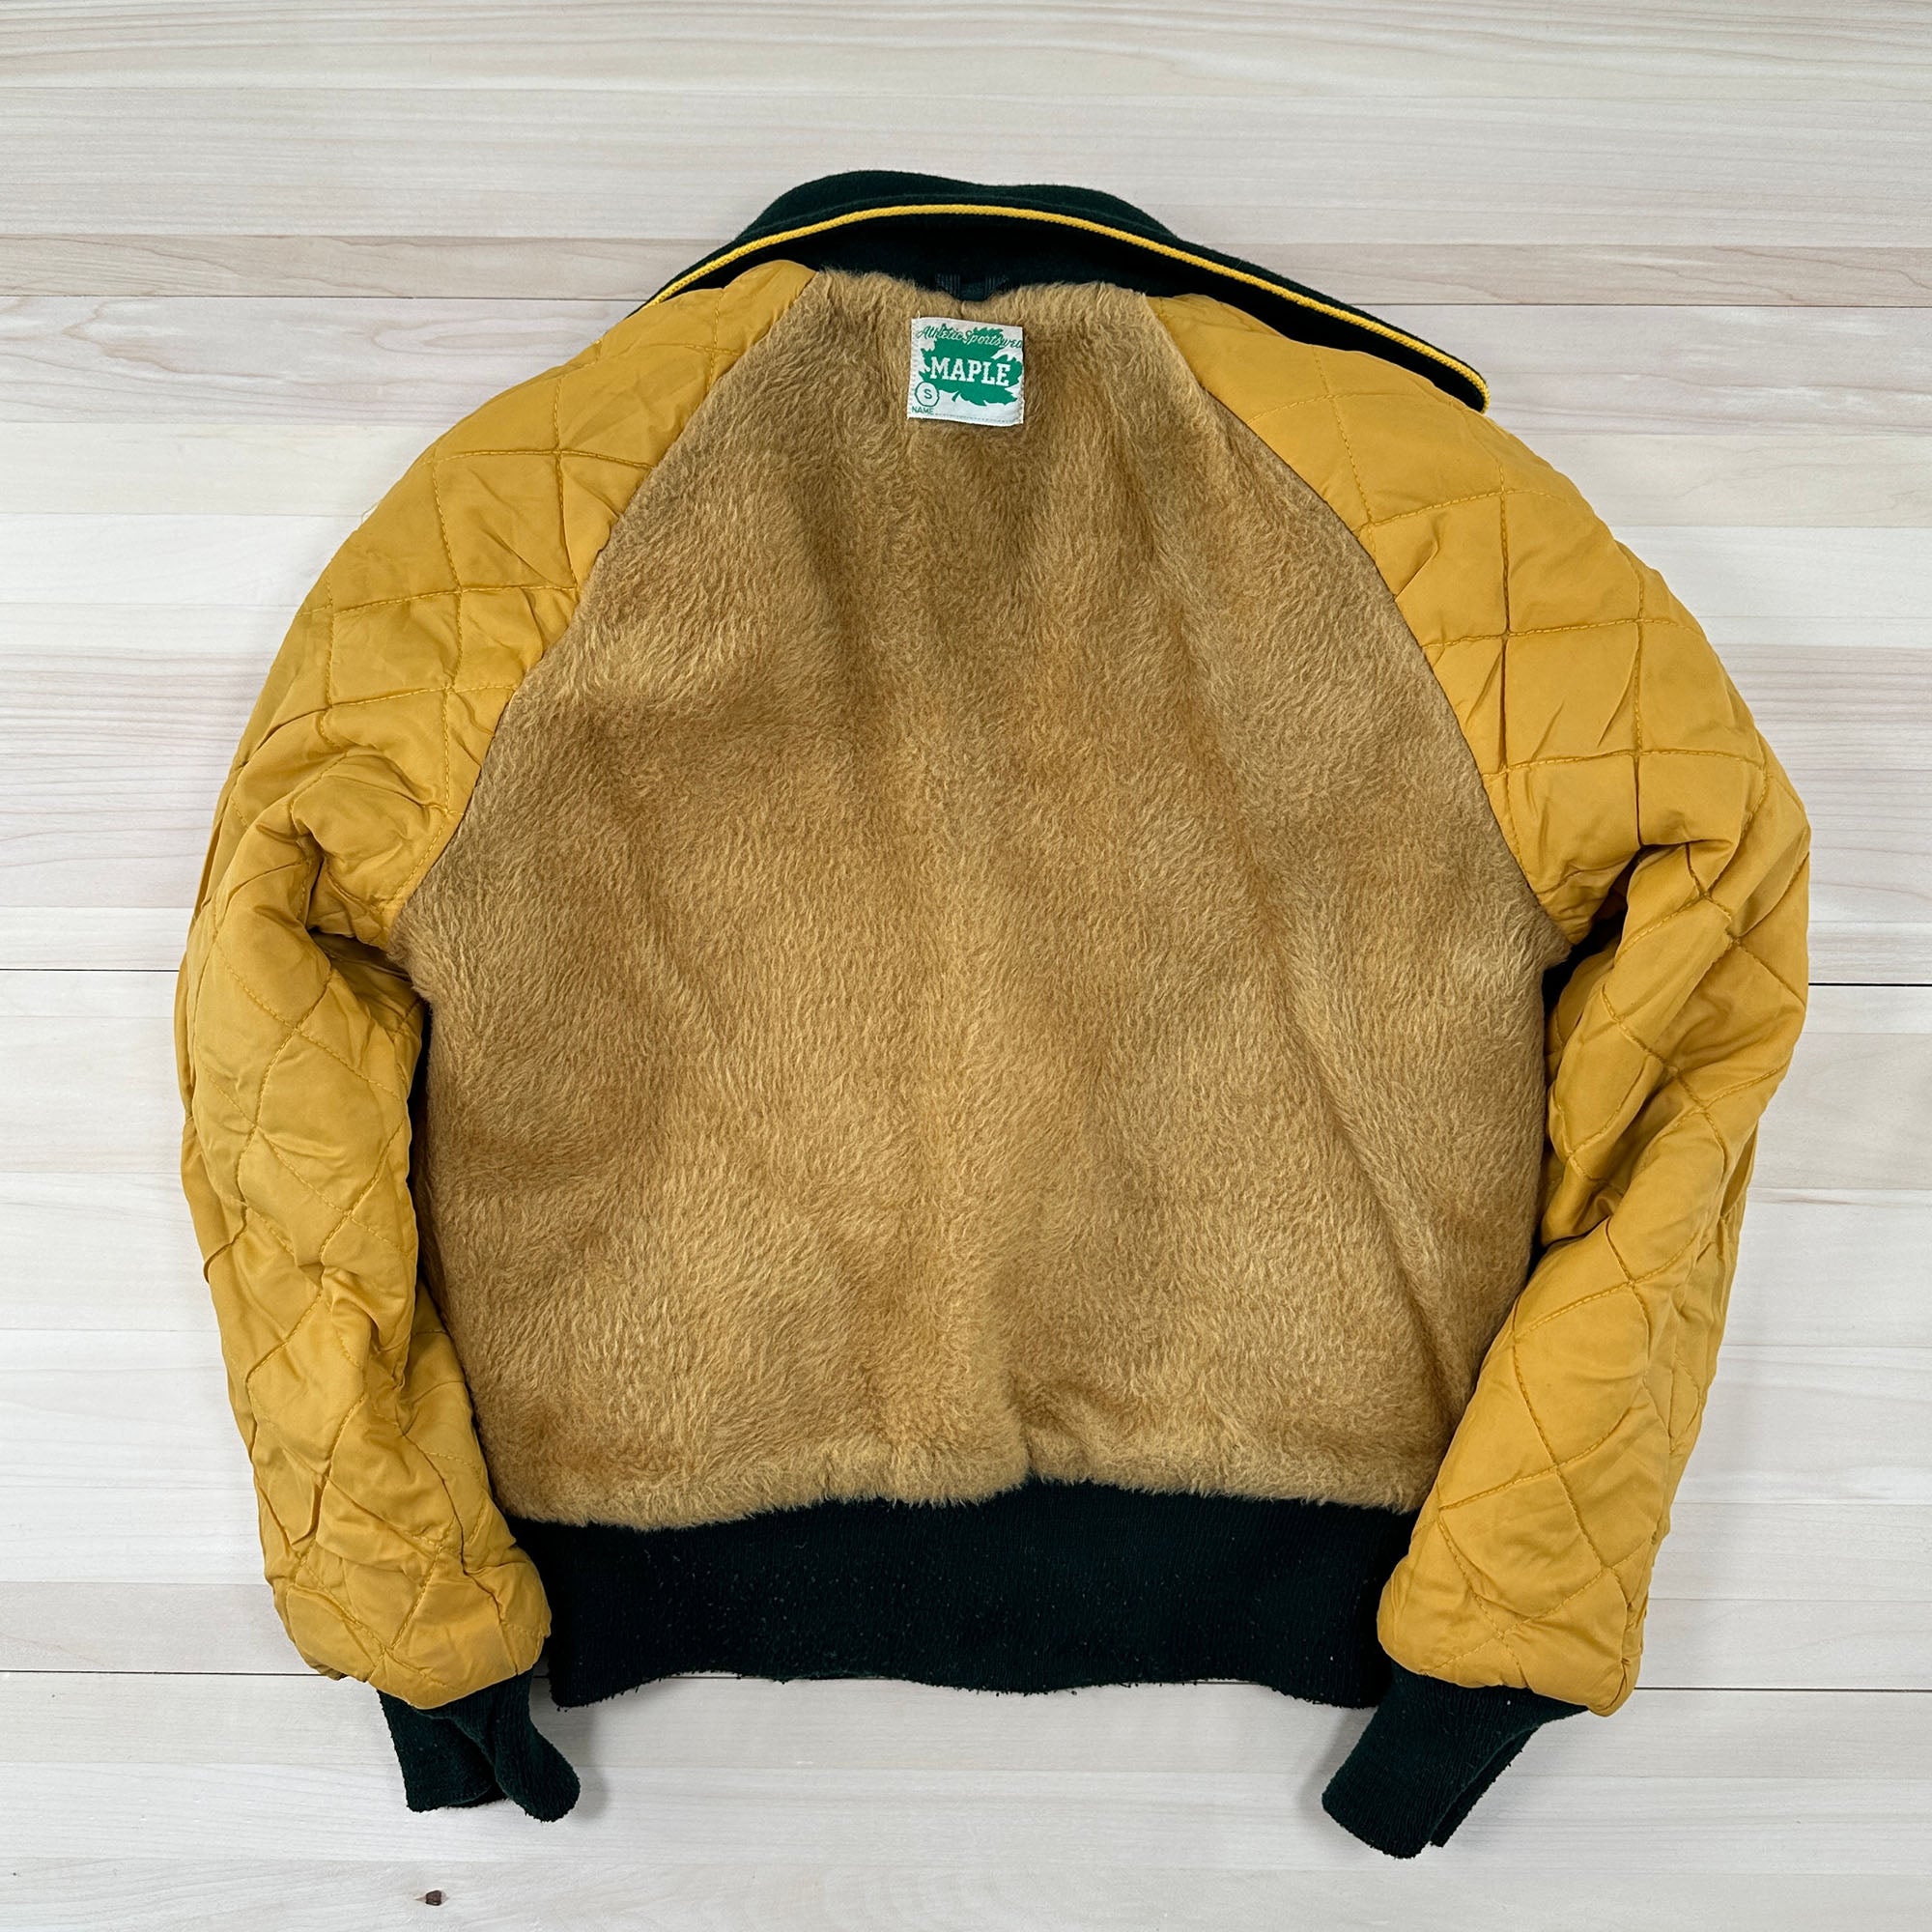 Vintage Maple Wool Varsity Jacket Packers Green and Gold - Small-5